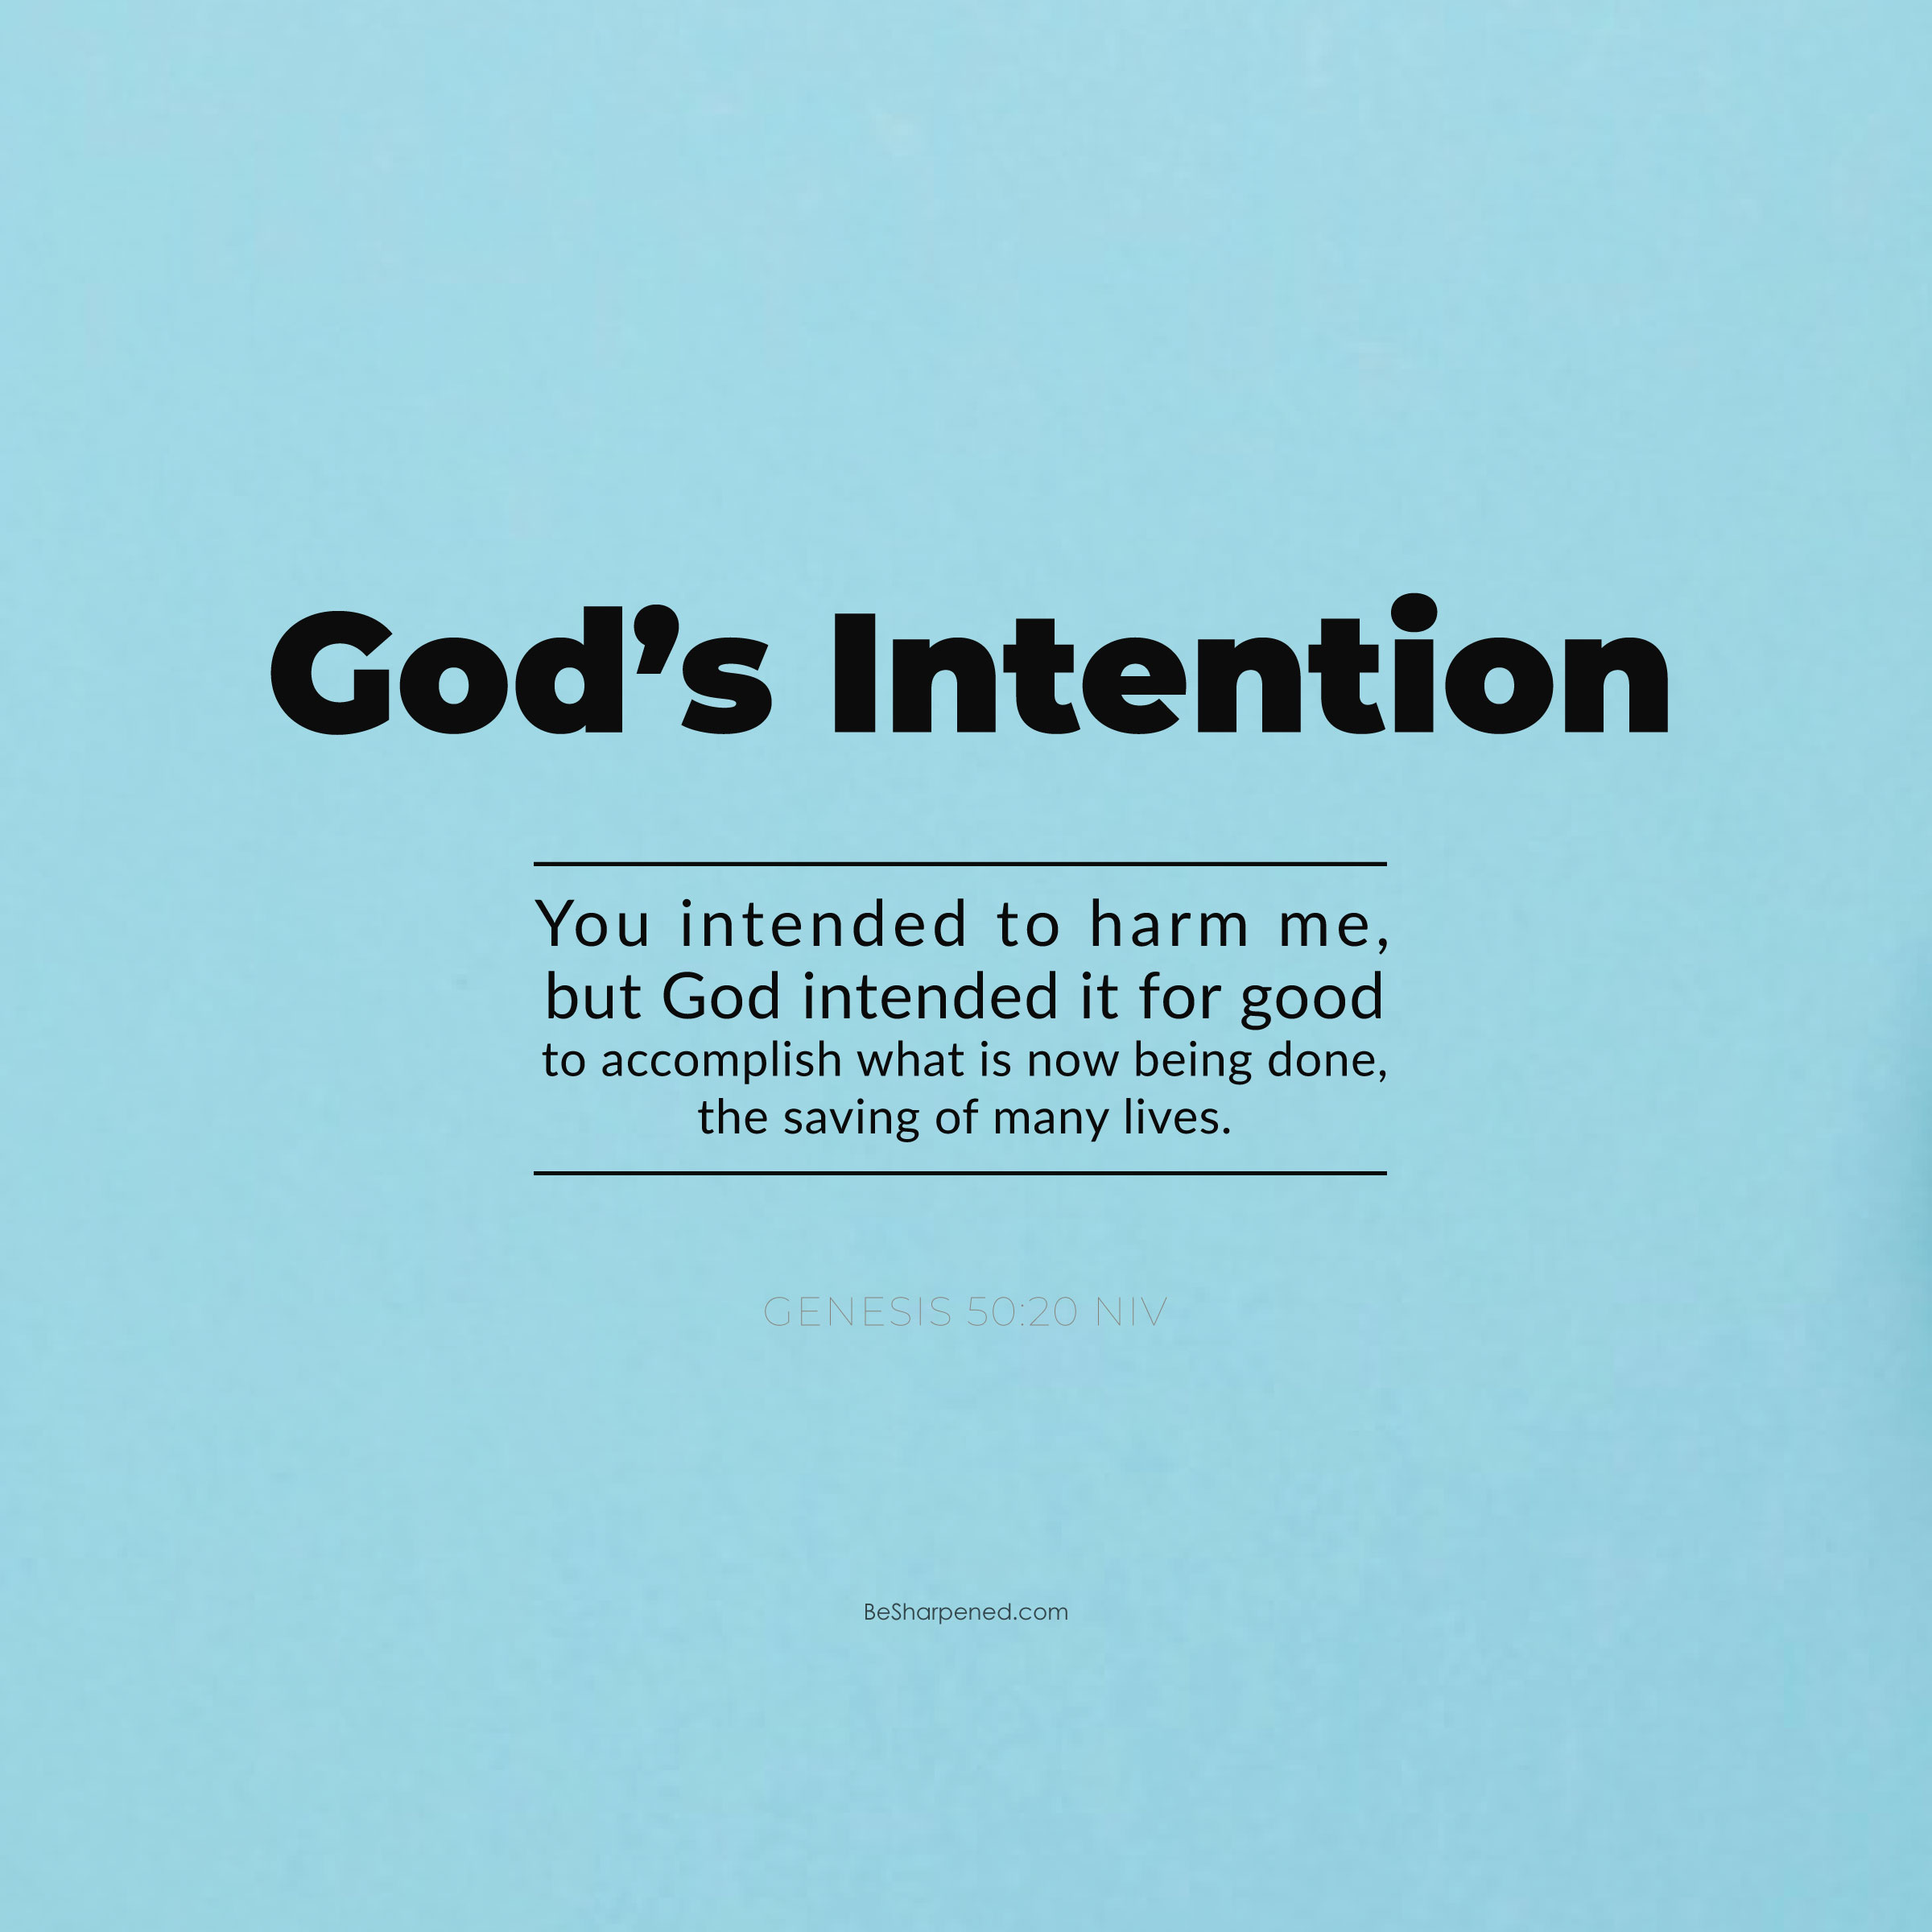 genesis 50:20 - God intends all for good